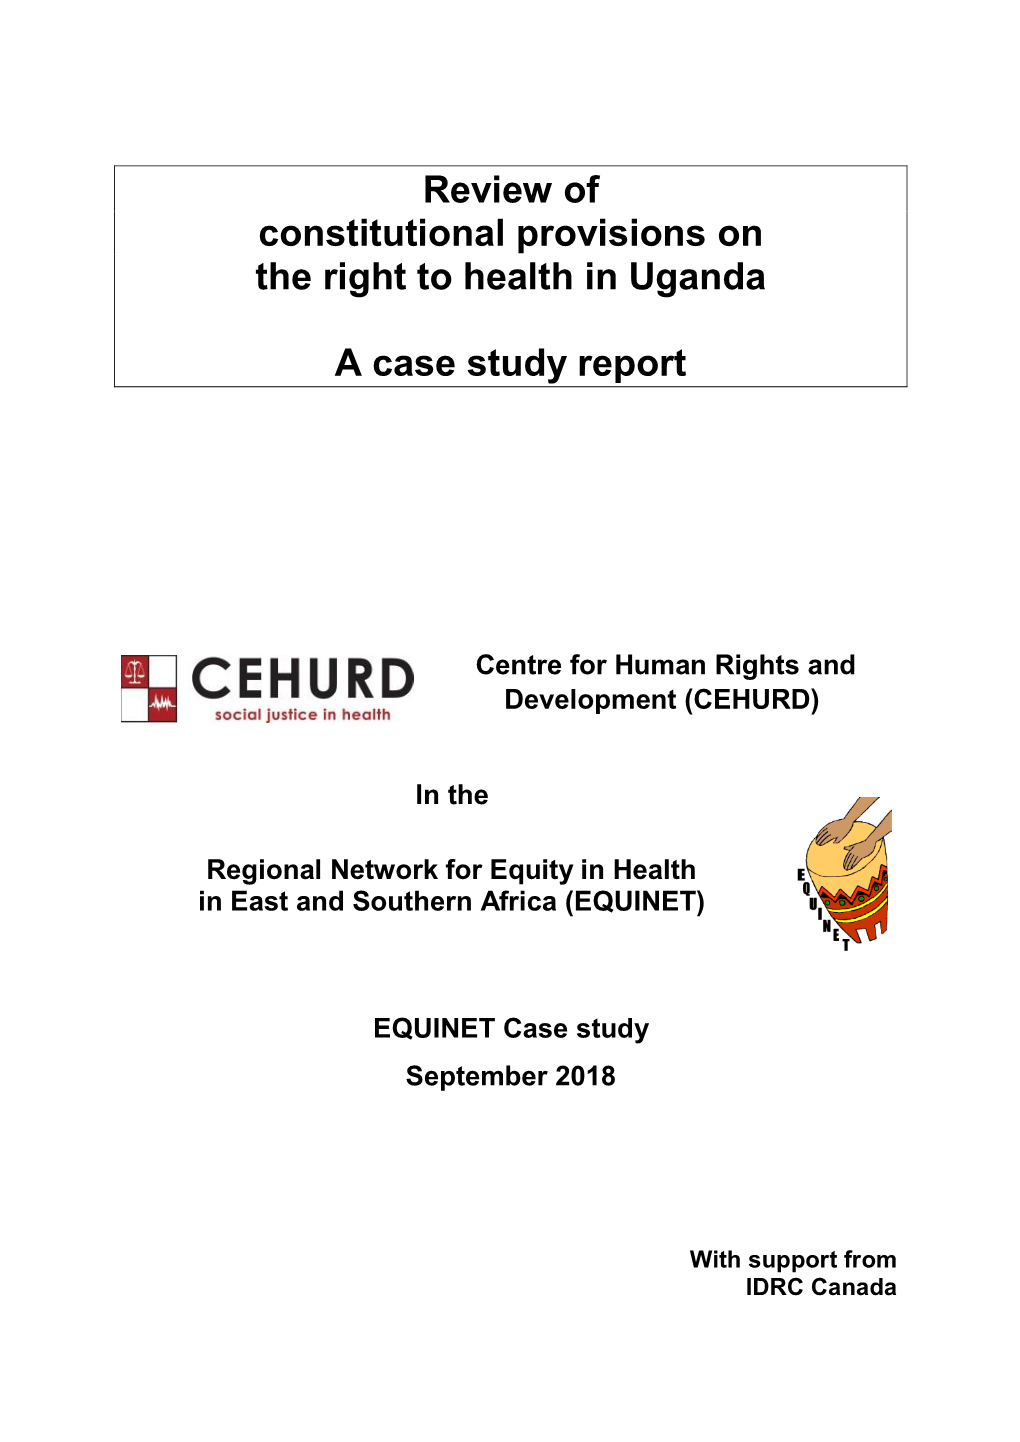 Review of Constitutional Provisions on the Right to Health in Uganda a Case Study Report, CEHURD, EQUINET, Uganda